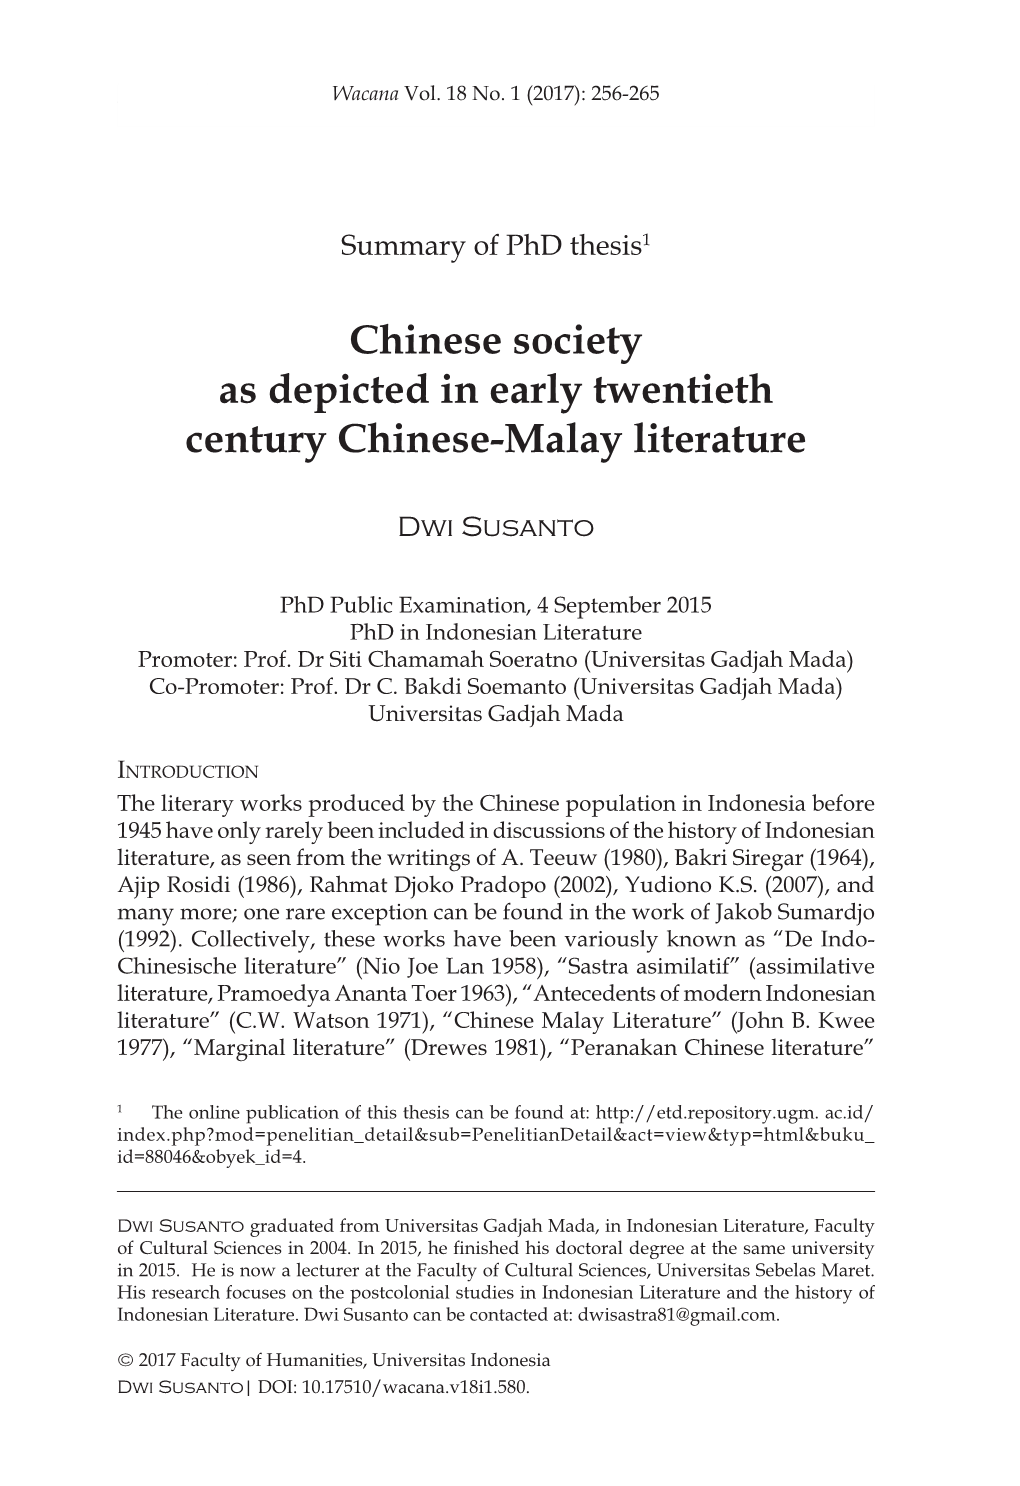 Chinese Society As Depicted in Early Twentieth Century Chinese-Malay Literature